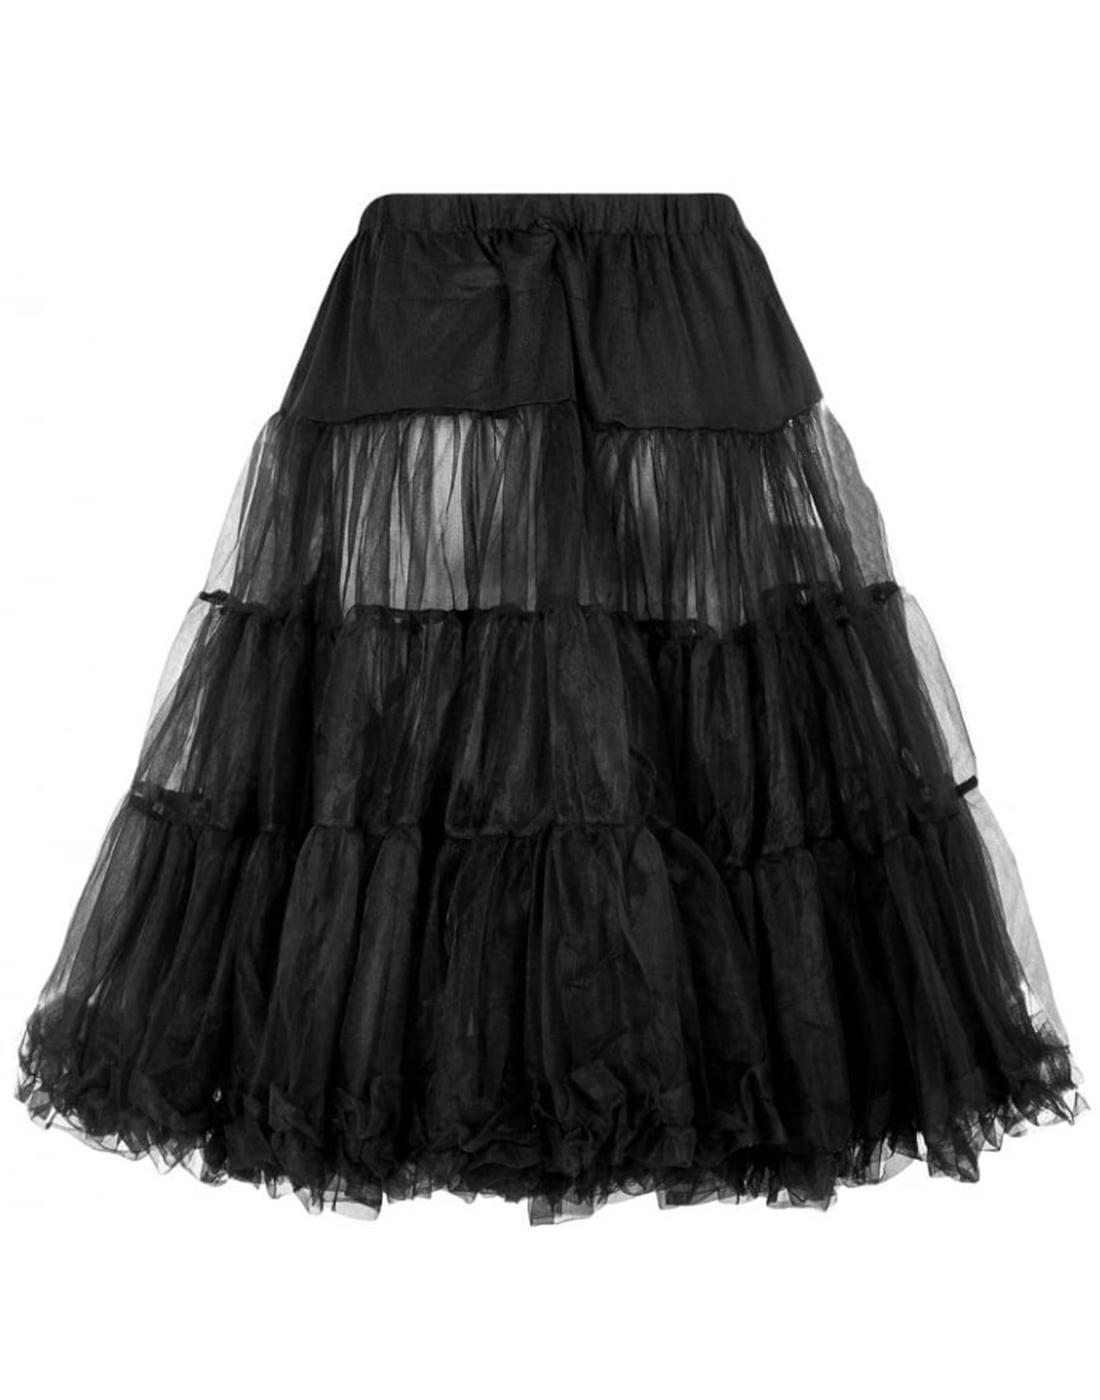 COLLECTIF Maddy Vintage Petticoat for Swing Dresses Black